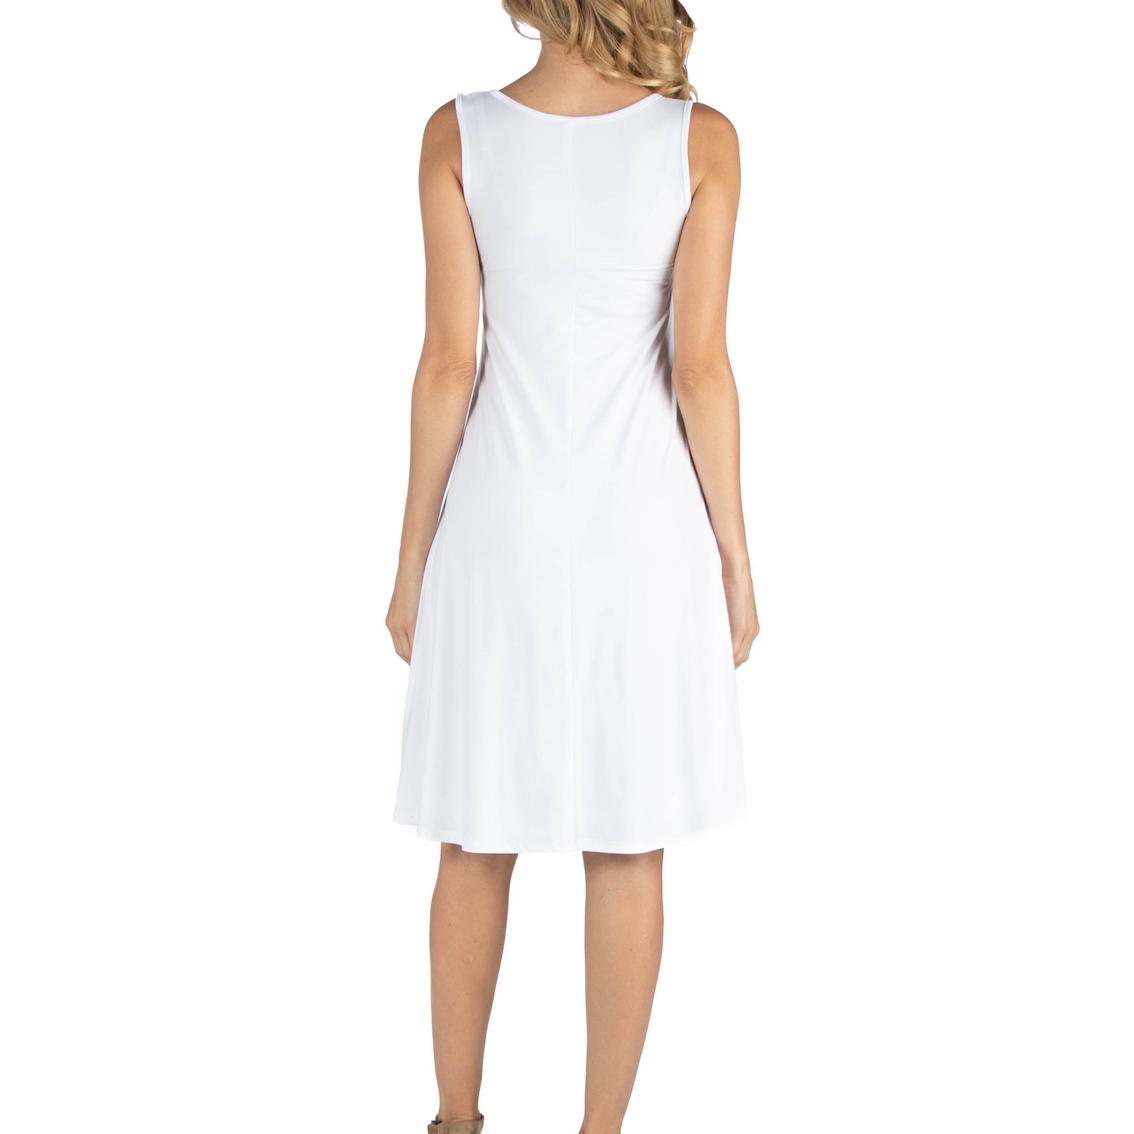 24seven Comfort Apparel A Line Slim Fit and Flare Maternity Dress - Image 3 of 4